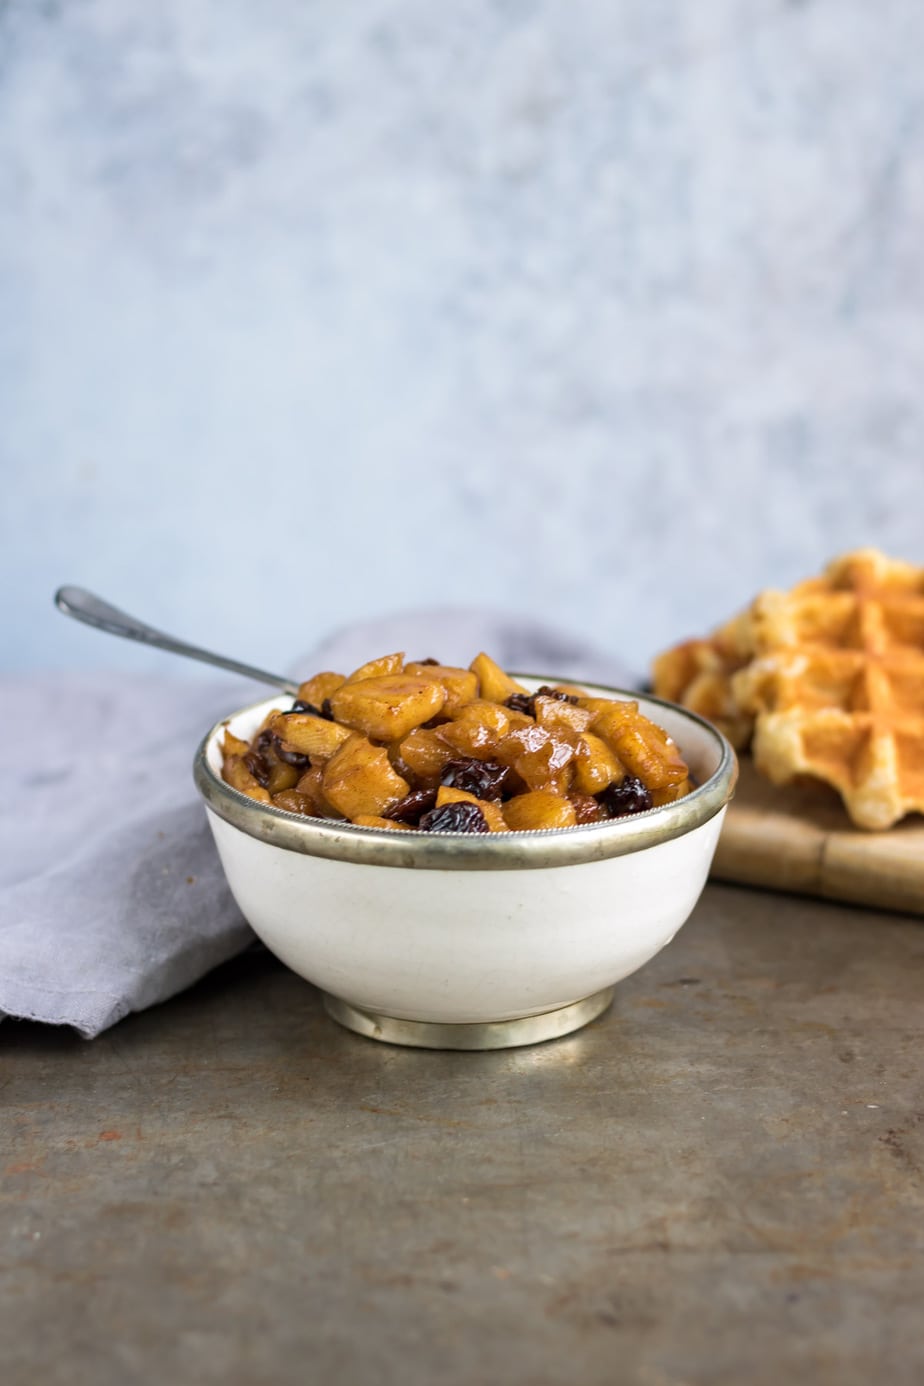 Bowl of apple compote with raisins and waffles in the background.